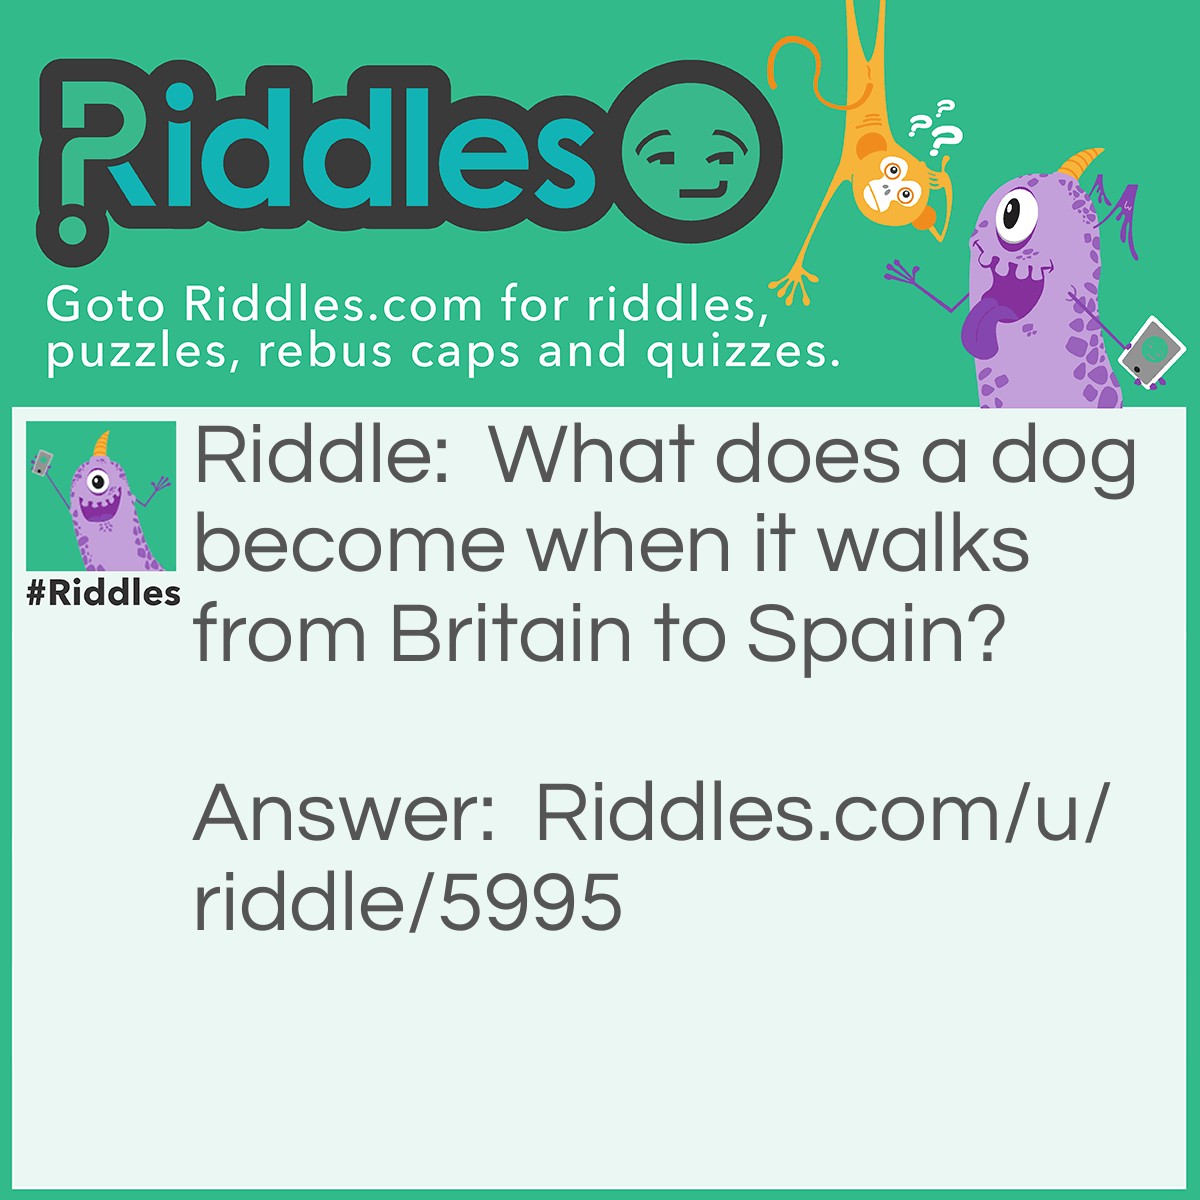 Riddle: What does a dog become when it walks from Britain to Spain? Answer: Perro.